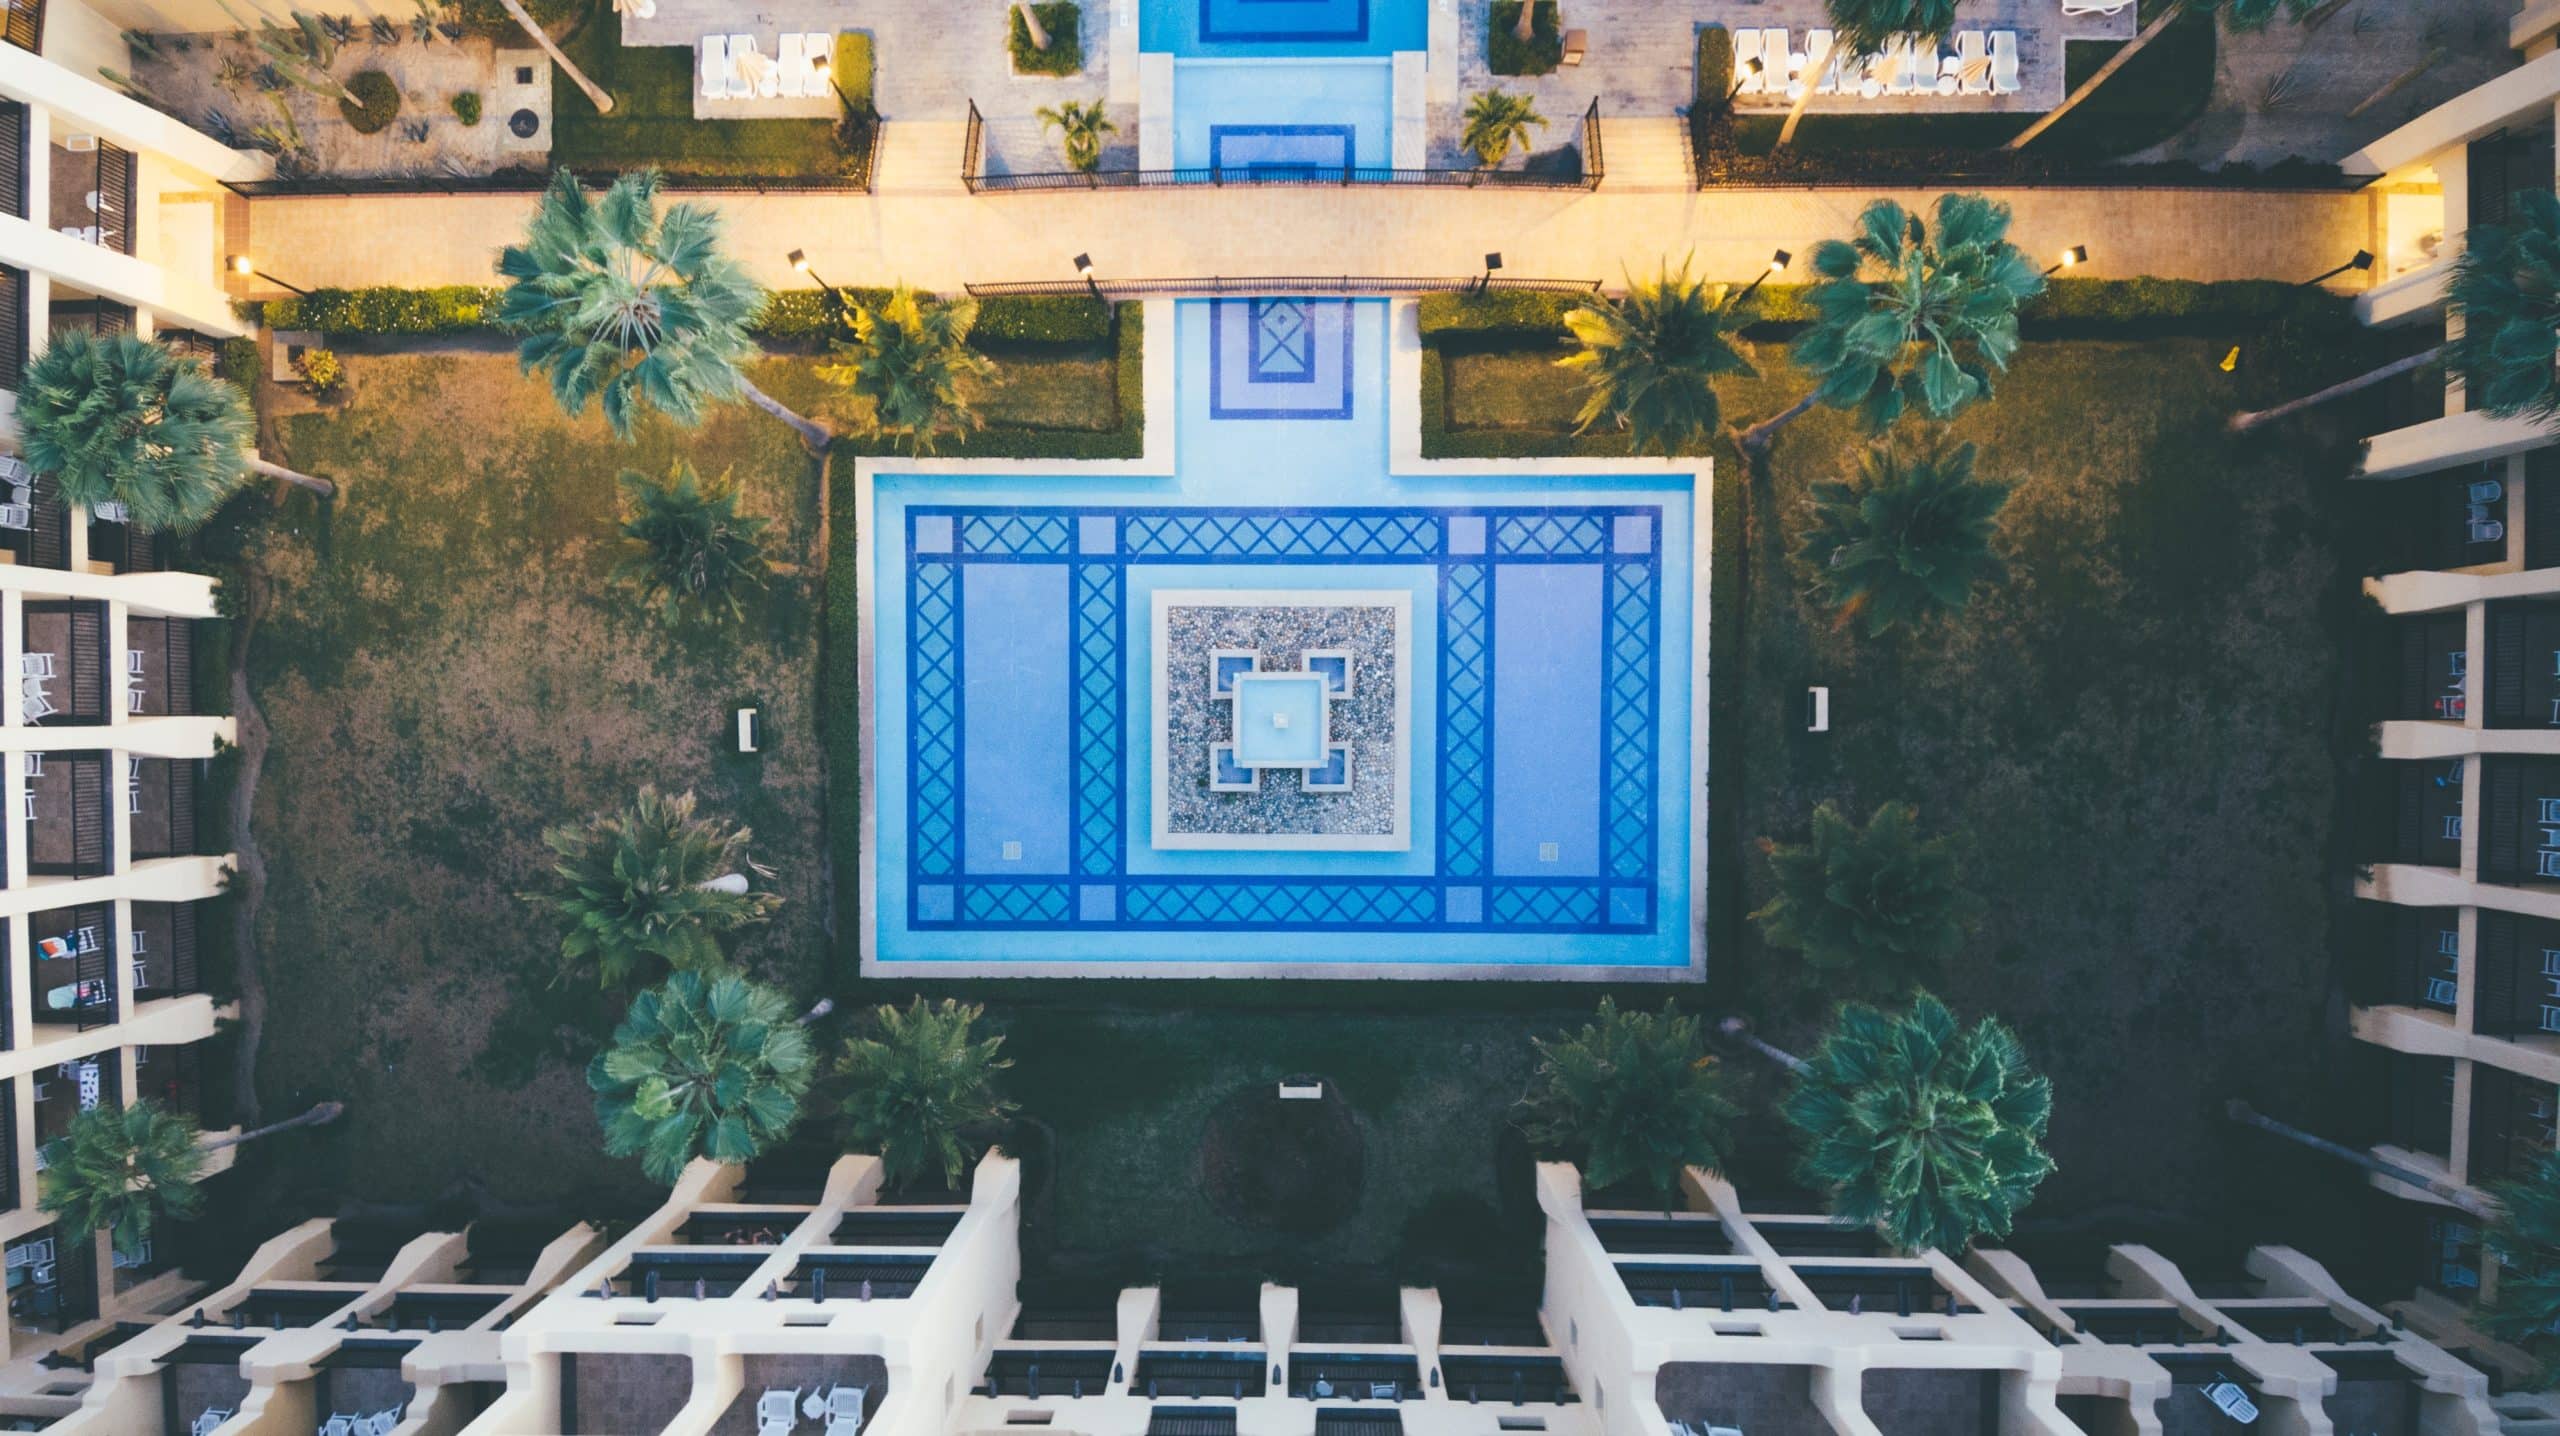 Aerial Shot of a Swimming Pool at a Resort in Mexico